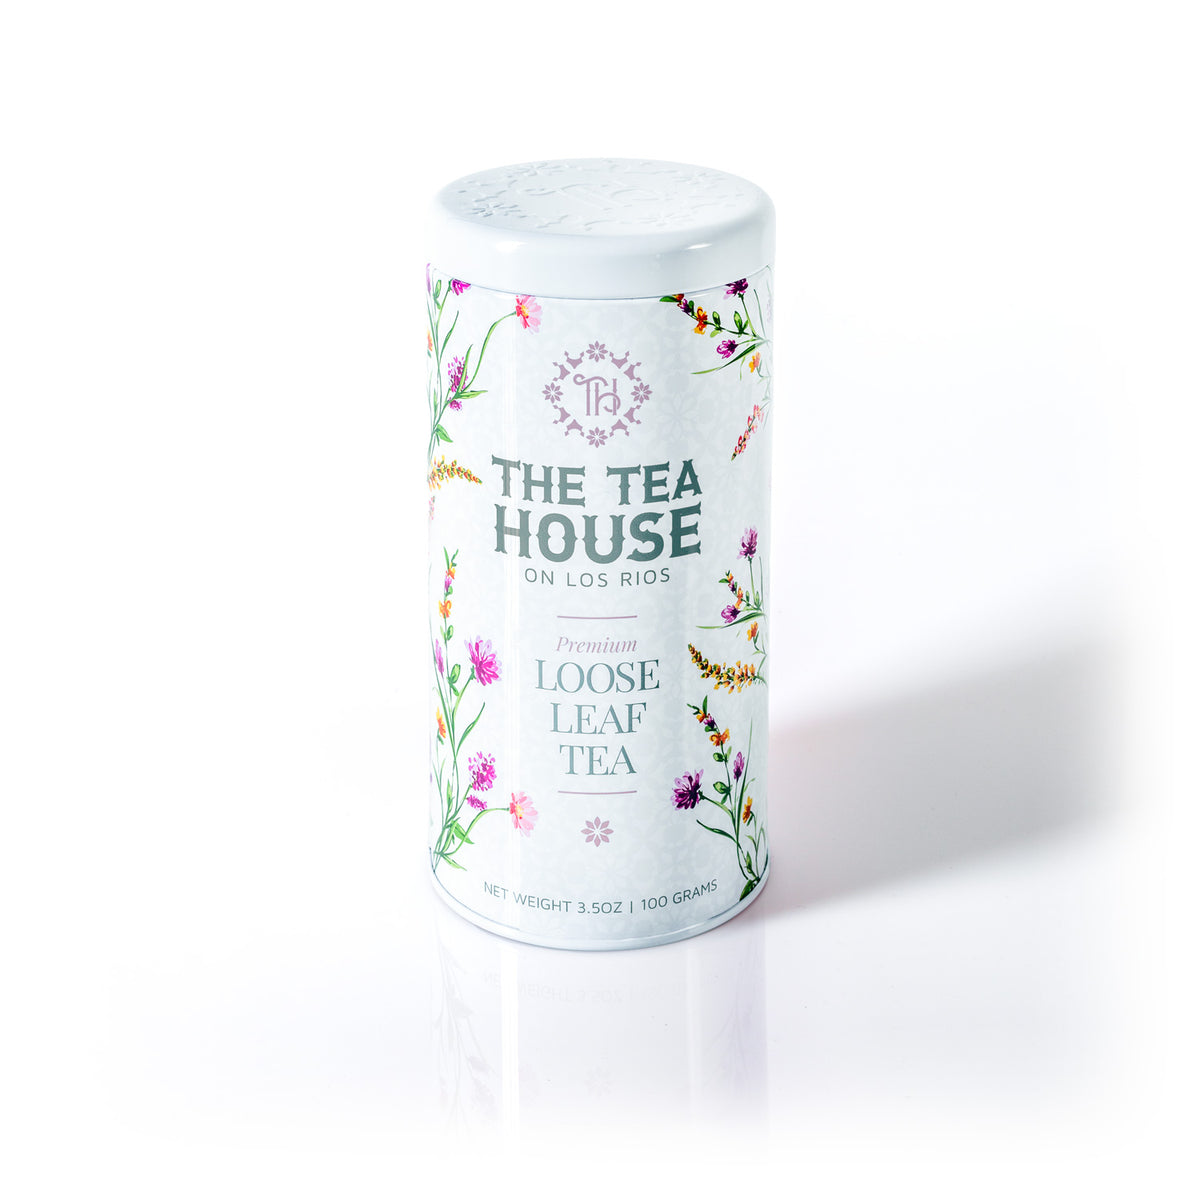 Discover The Tea House on Los Rios with this 100g Loose Leaf Tea Tin